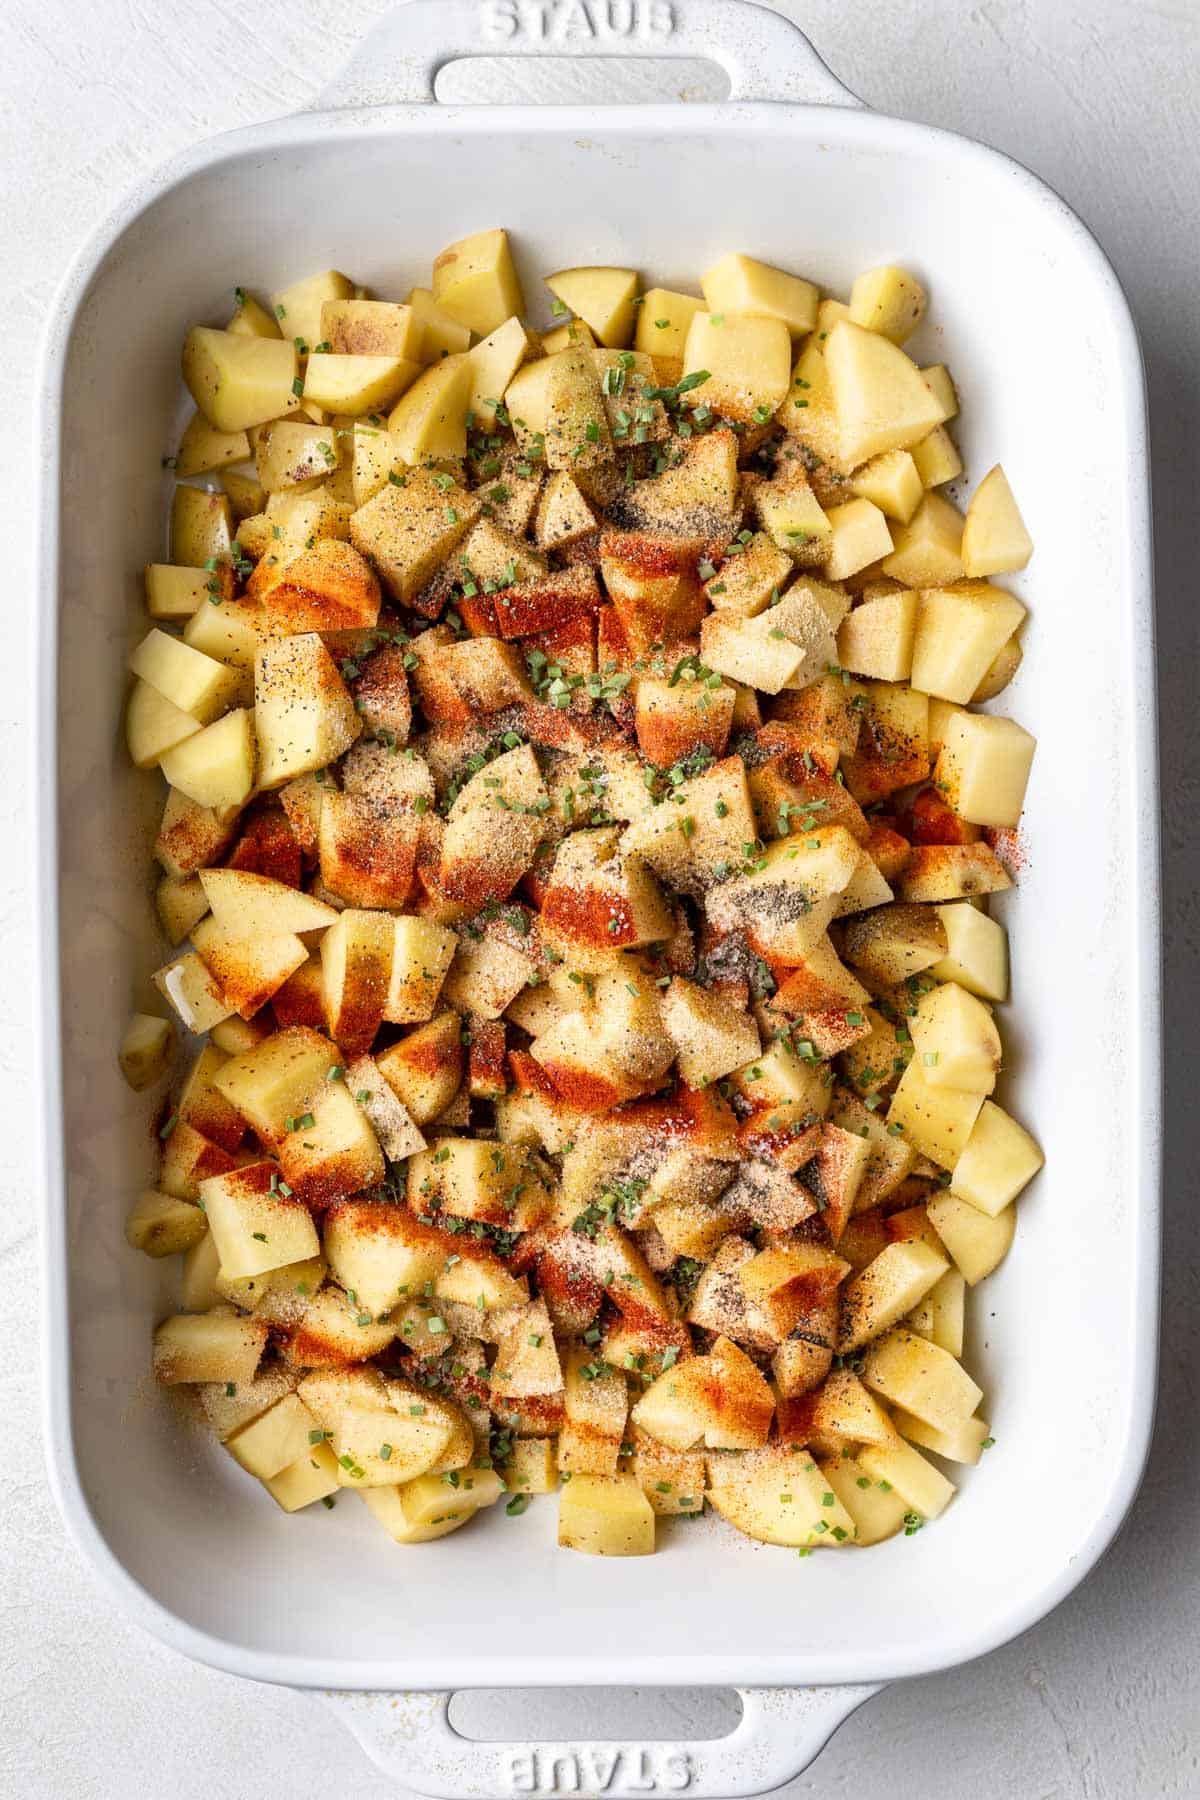 Uncooked potatoes with spices drizzled over top in baking dish.